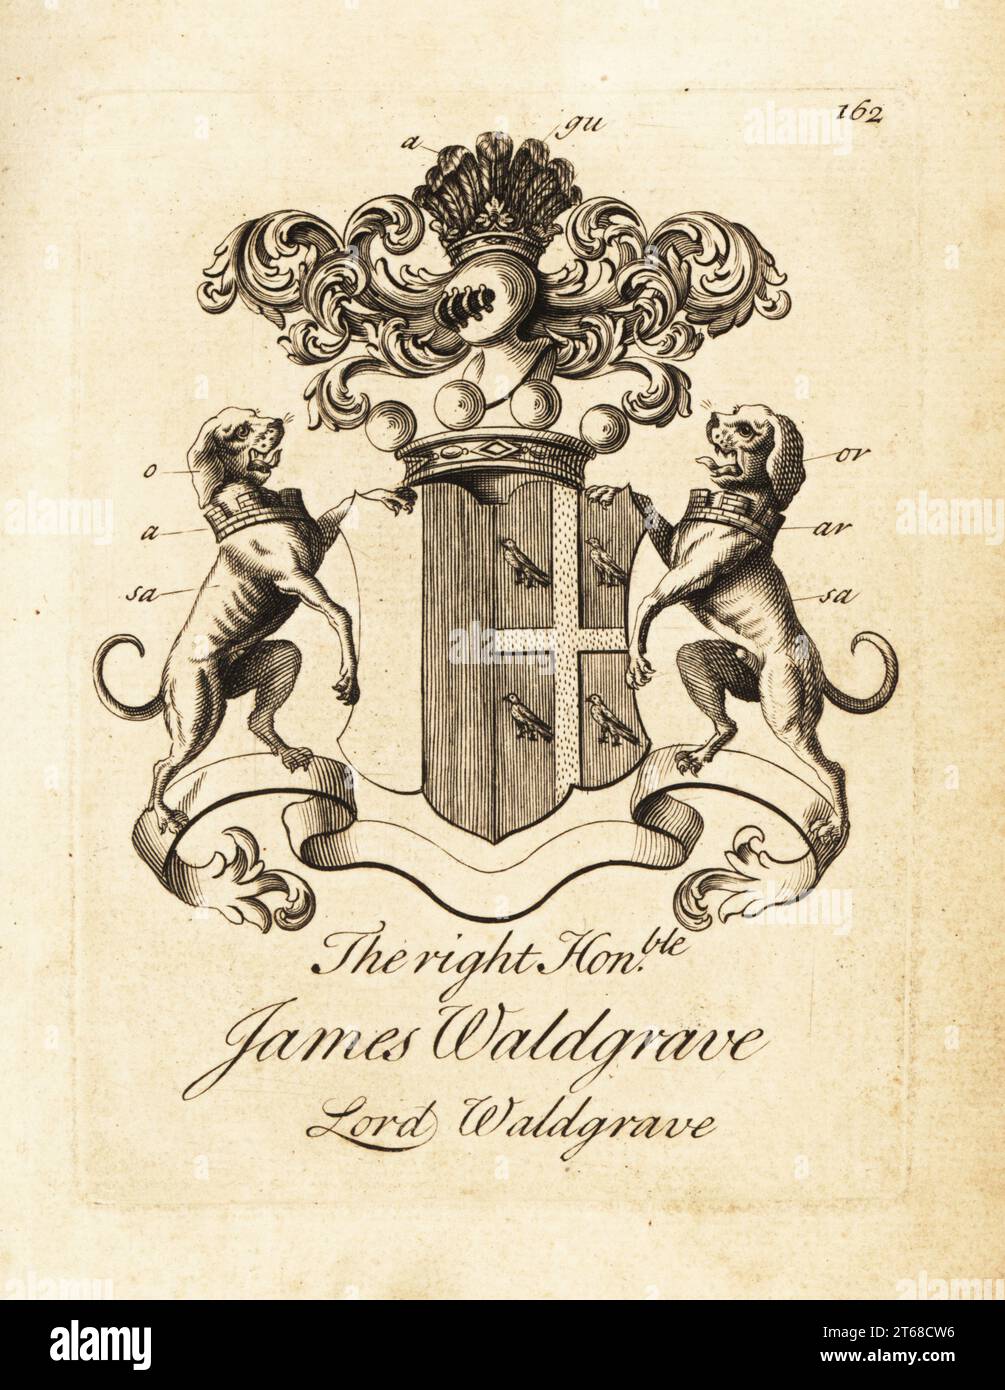 Coat of arms of the Right Honourable James Waldgrave, Lord Waldgrave. Copperplate engraving by Andrew Johnston after C. Gardiner from Notitia Anglicana, Shewing the Achievements of all the English Nobility, Andrew Johnson, the Strand, London, 1724. Stock Photo